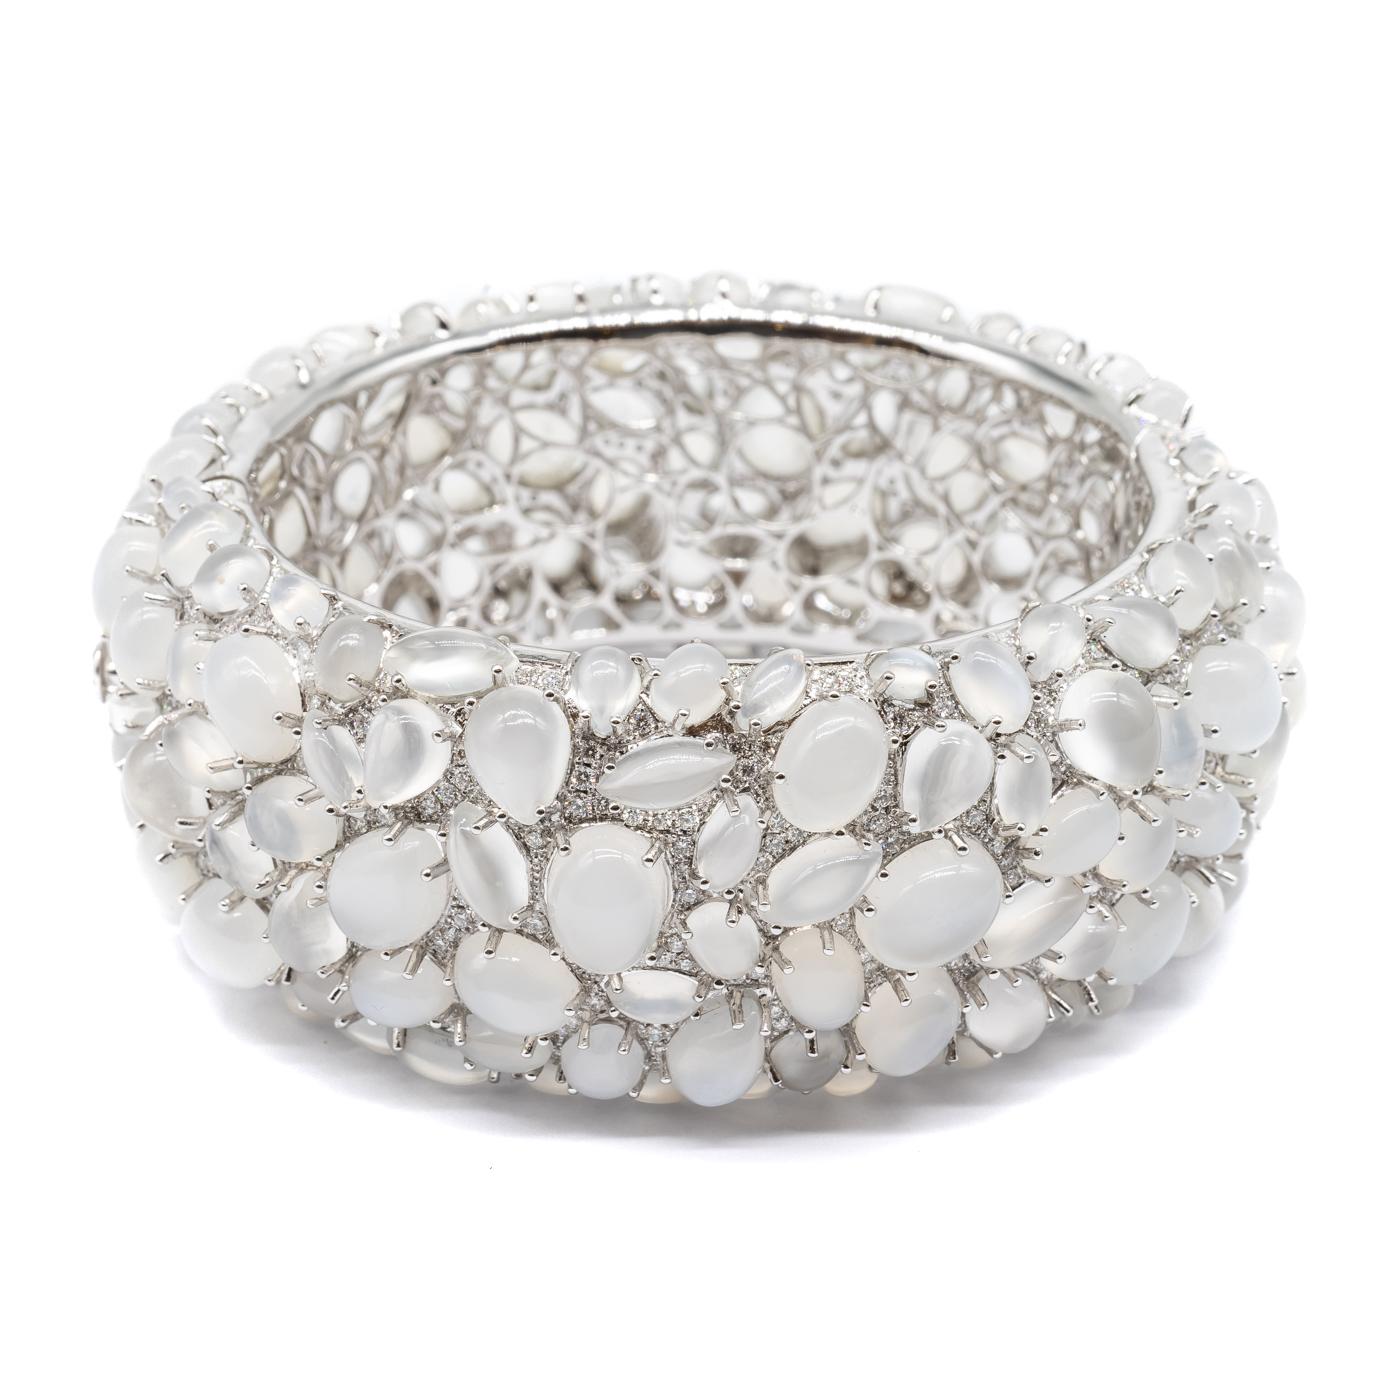 A moonstone and diamond bangle bracelet, set with cabochon-cut moonstones, weighing an estimated total of 138.45ct, and pavé set round brilliant-cut diamonds, weighing an estimated total of 4.84ct, mounted in 18ct white gold.